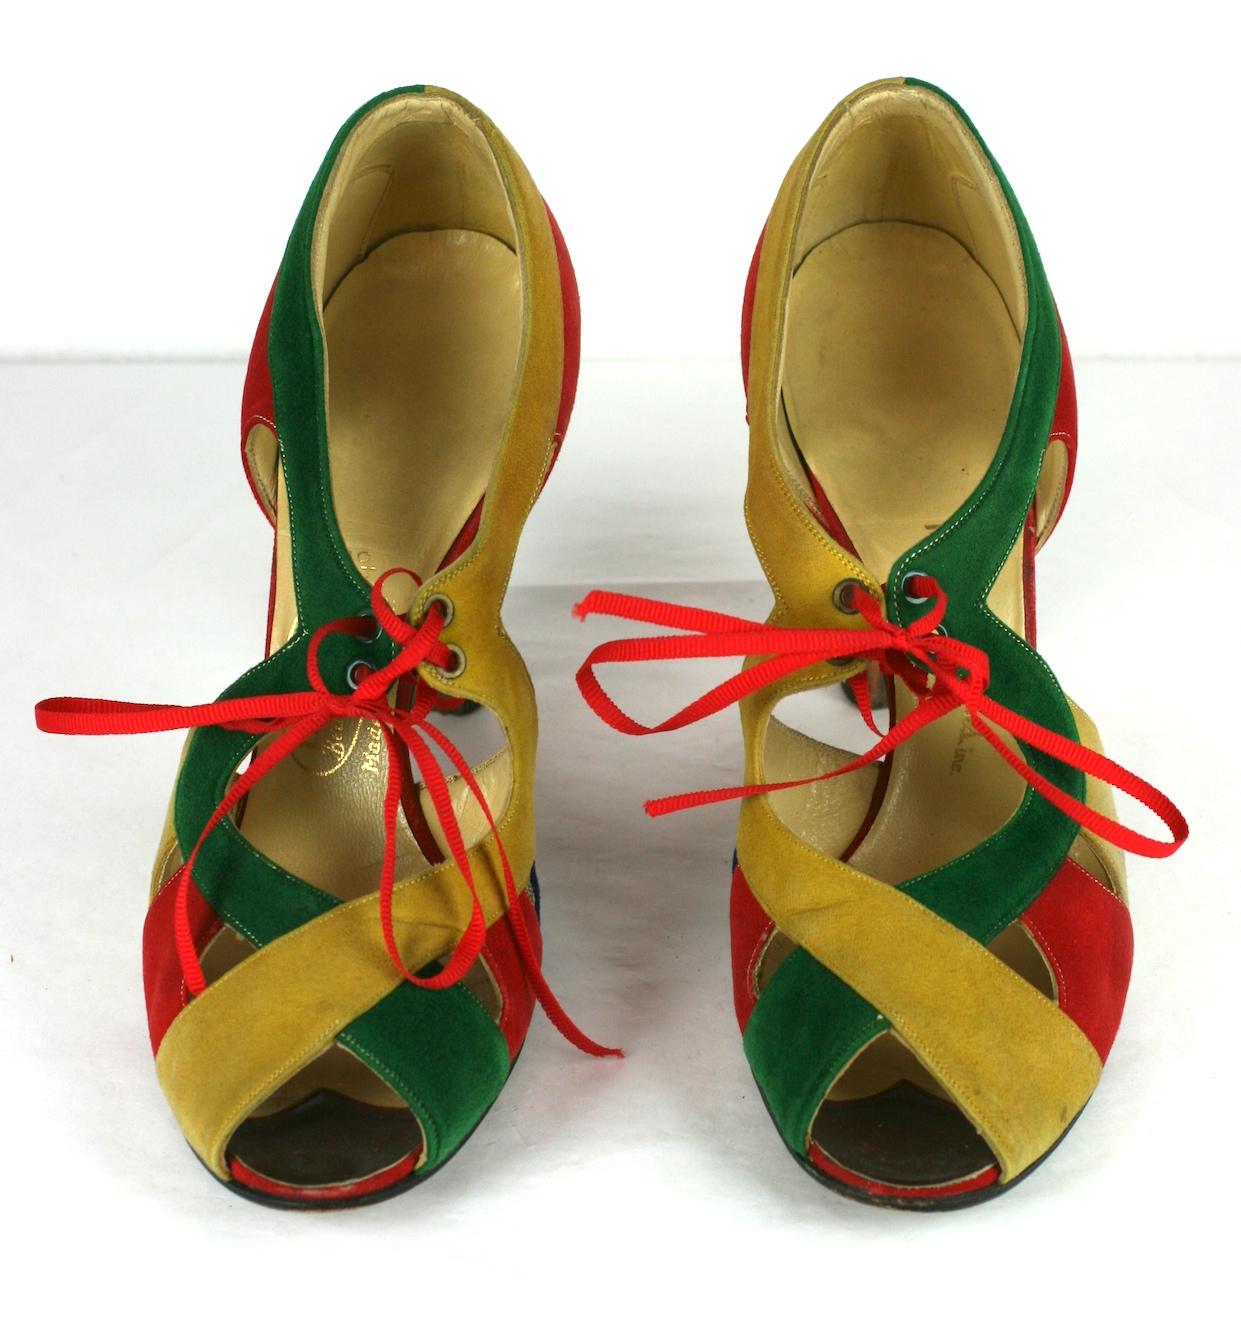 I. Miller Art Deco colorful suede shoes from the 1930's. Striking and brightly hued in primary tones. I. Miller was legendary store on 5th Ave in the early days of NY retail.
Laces are not original. Tiny size.
Size 4N. Base toe to heel 7